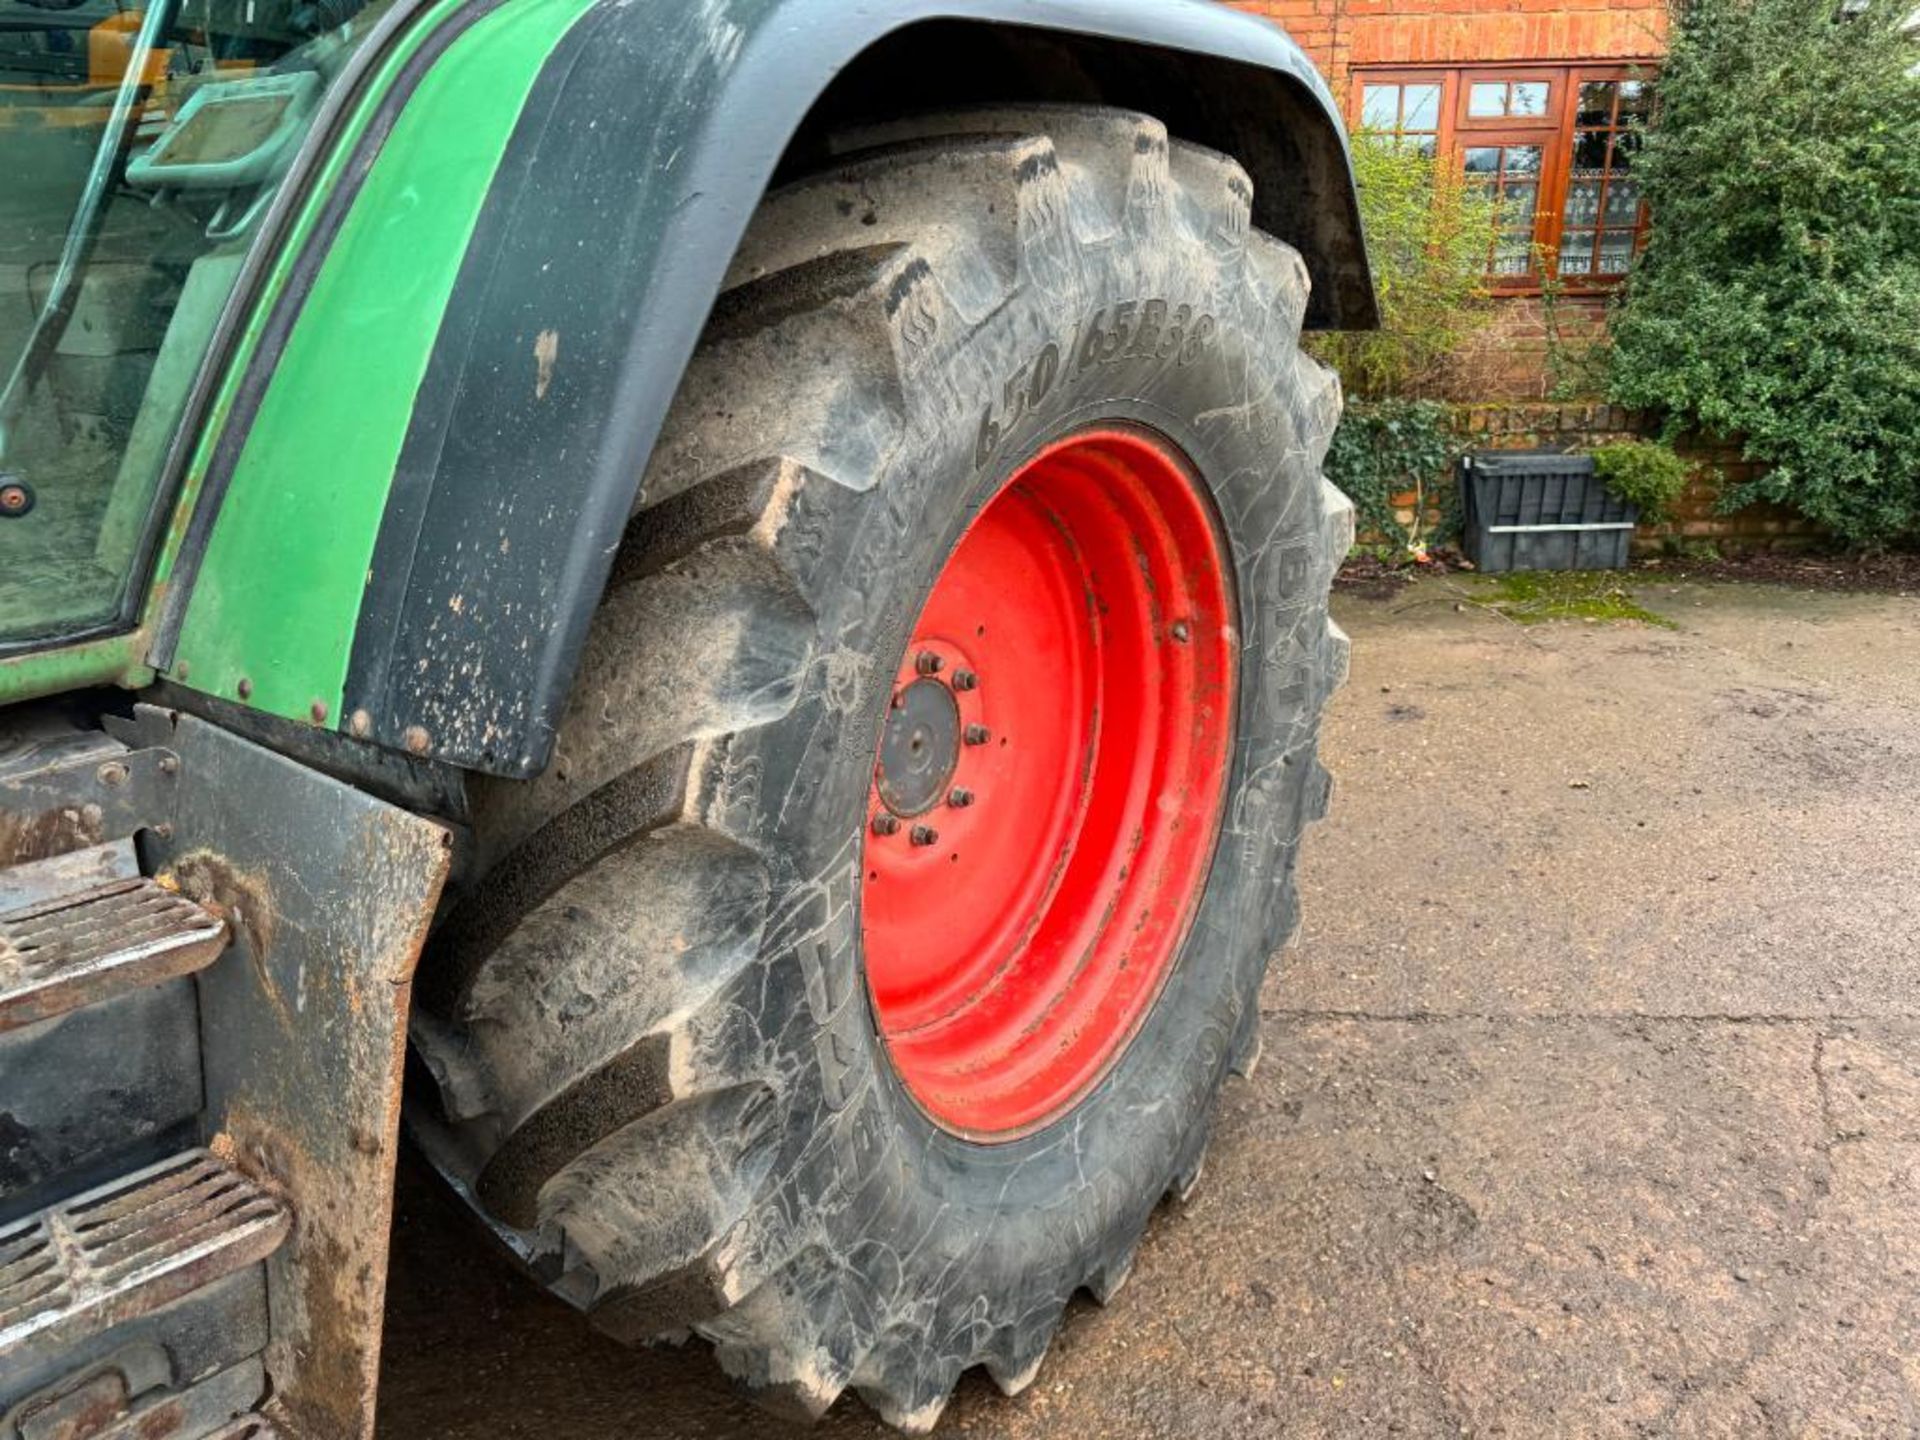 2001 Fendt 716 Vario 50kph 4wd tractor with 4 electric spools, air brakes and front linkage on BKT 5 - Image 8 of 22